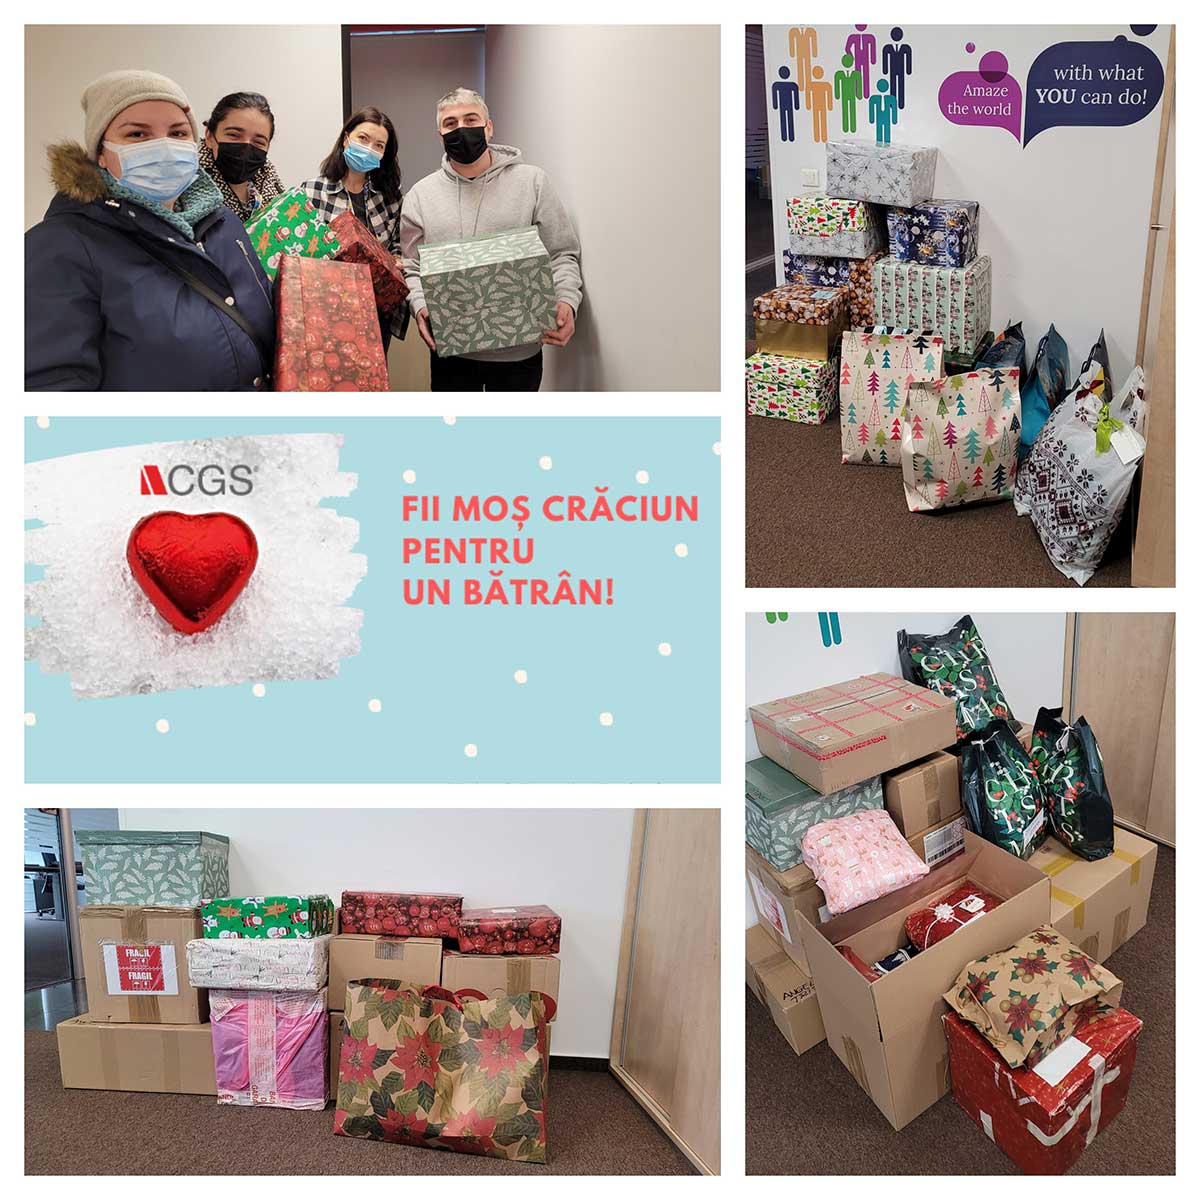 CGS employees collect gifts for a retirement home